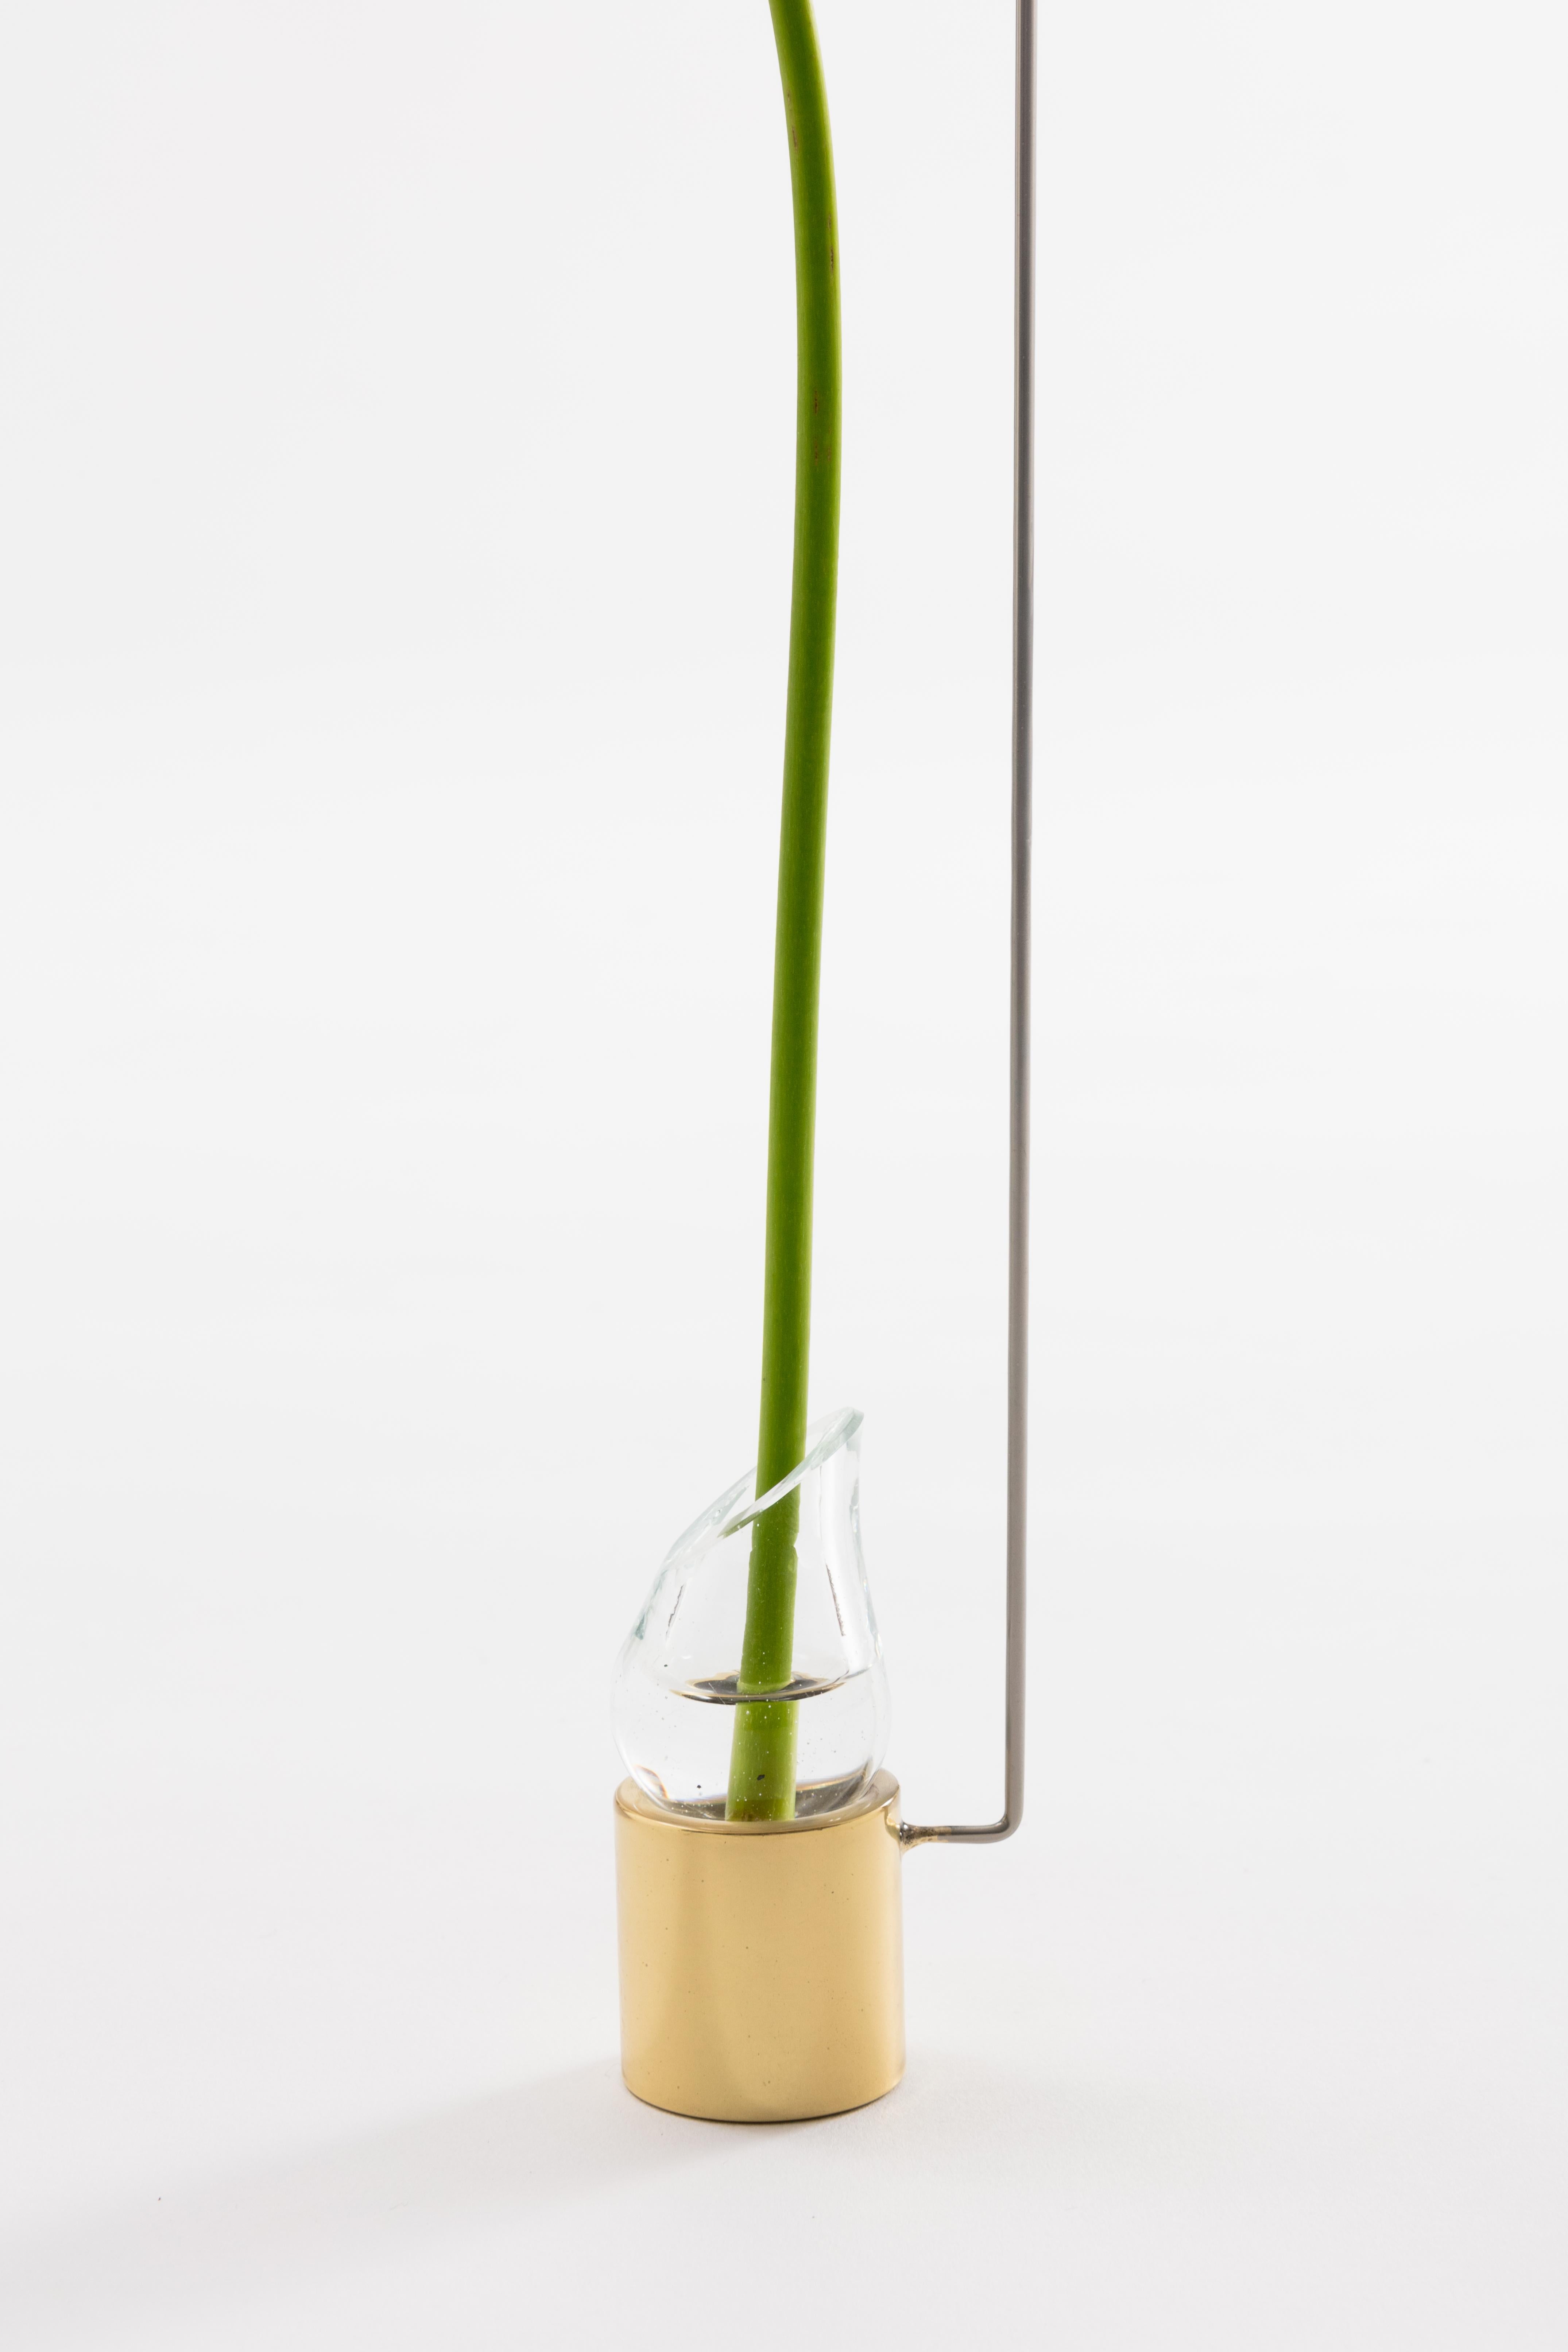 International Style Set of 4 Contemporary Minimalist Small Brass and Glass Solitary Vase